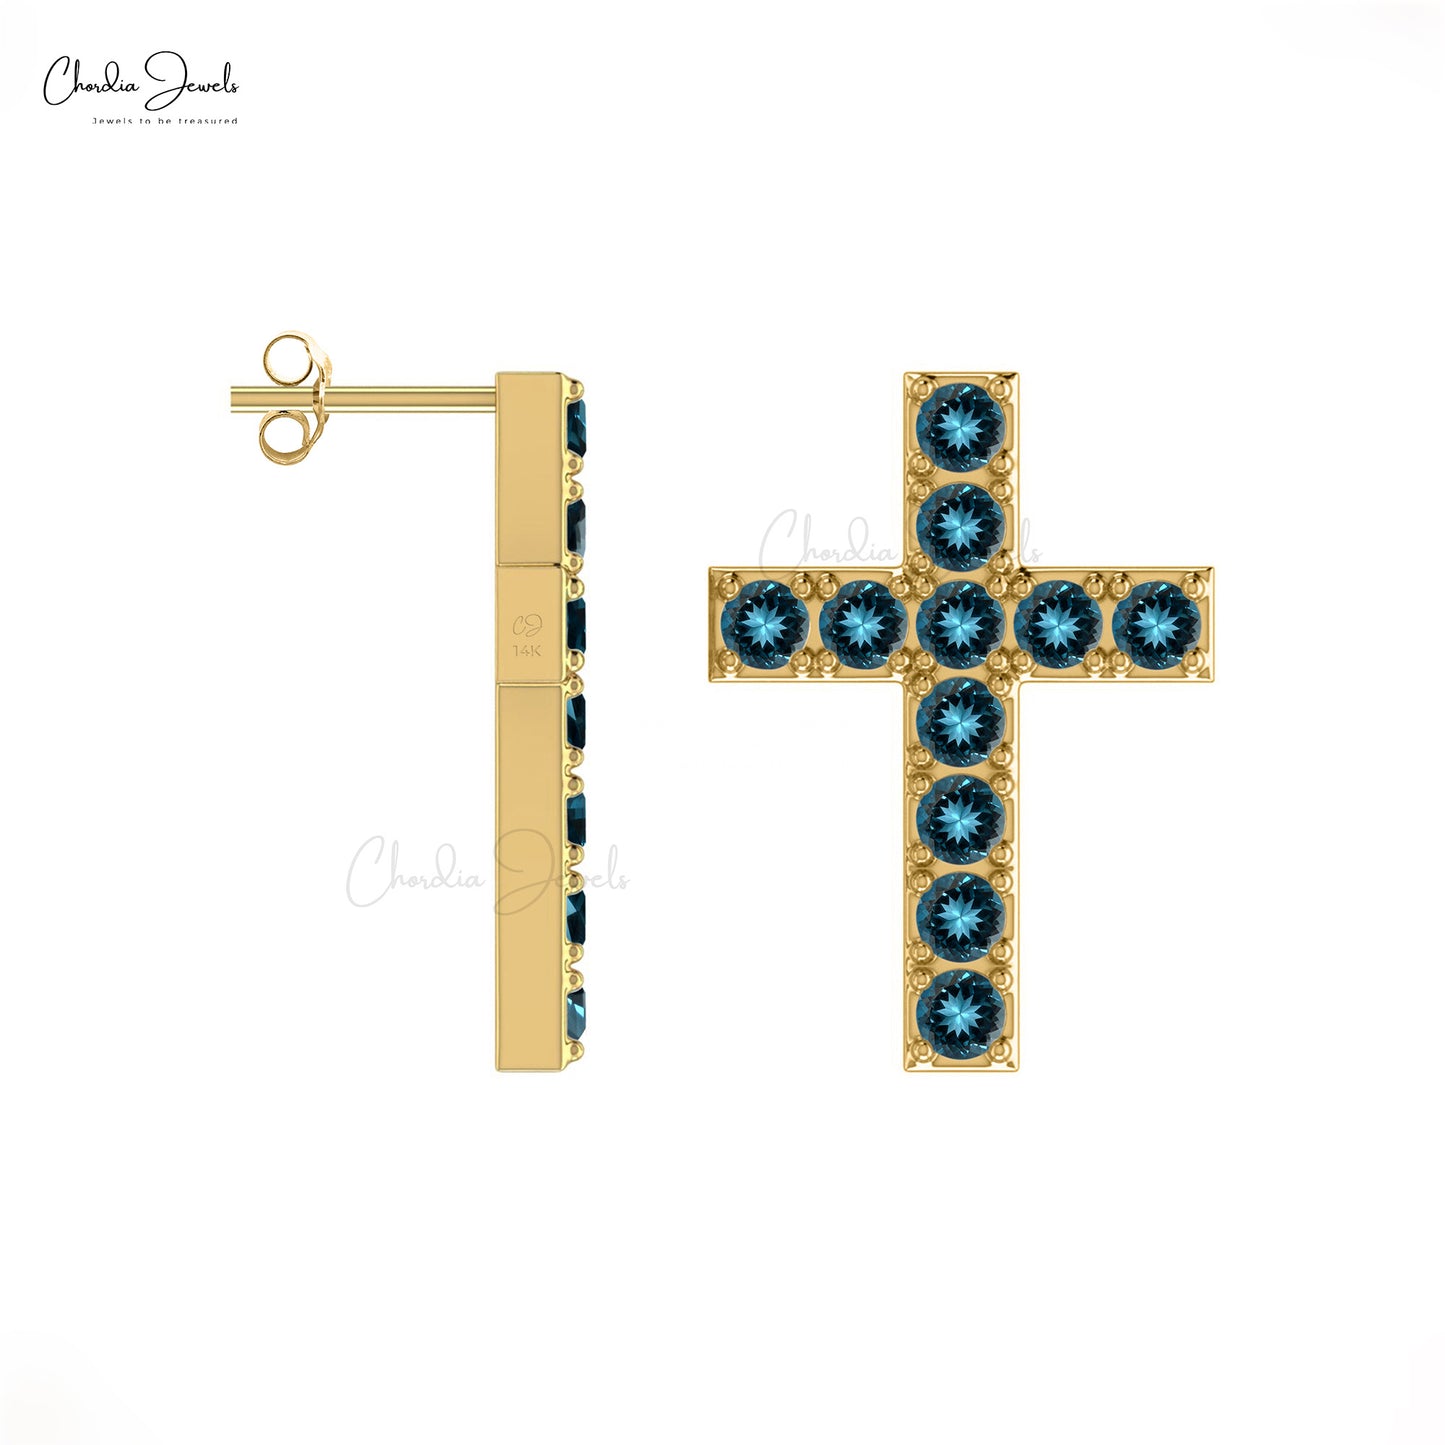 Load image into Gallery viewer, Best selling Cross Stud Earrings Religious Style Genuine London Blue Topaz Cross Jewelry Earrings Real 14k Gold Earring Birthday Gift For Sister
